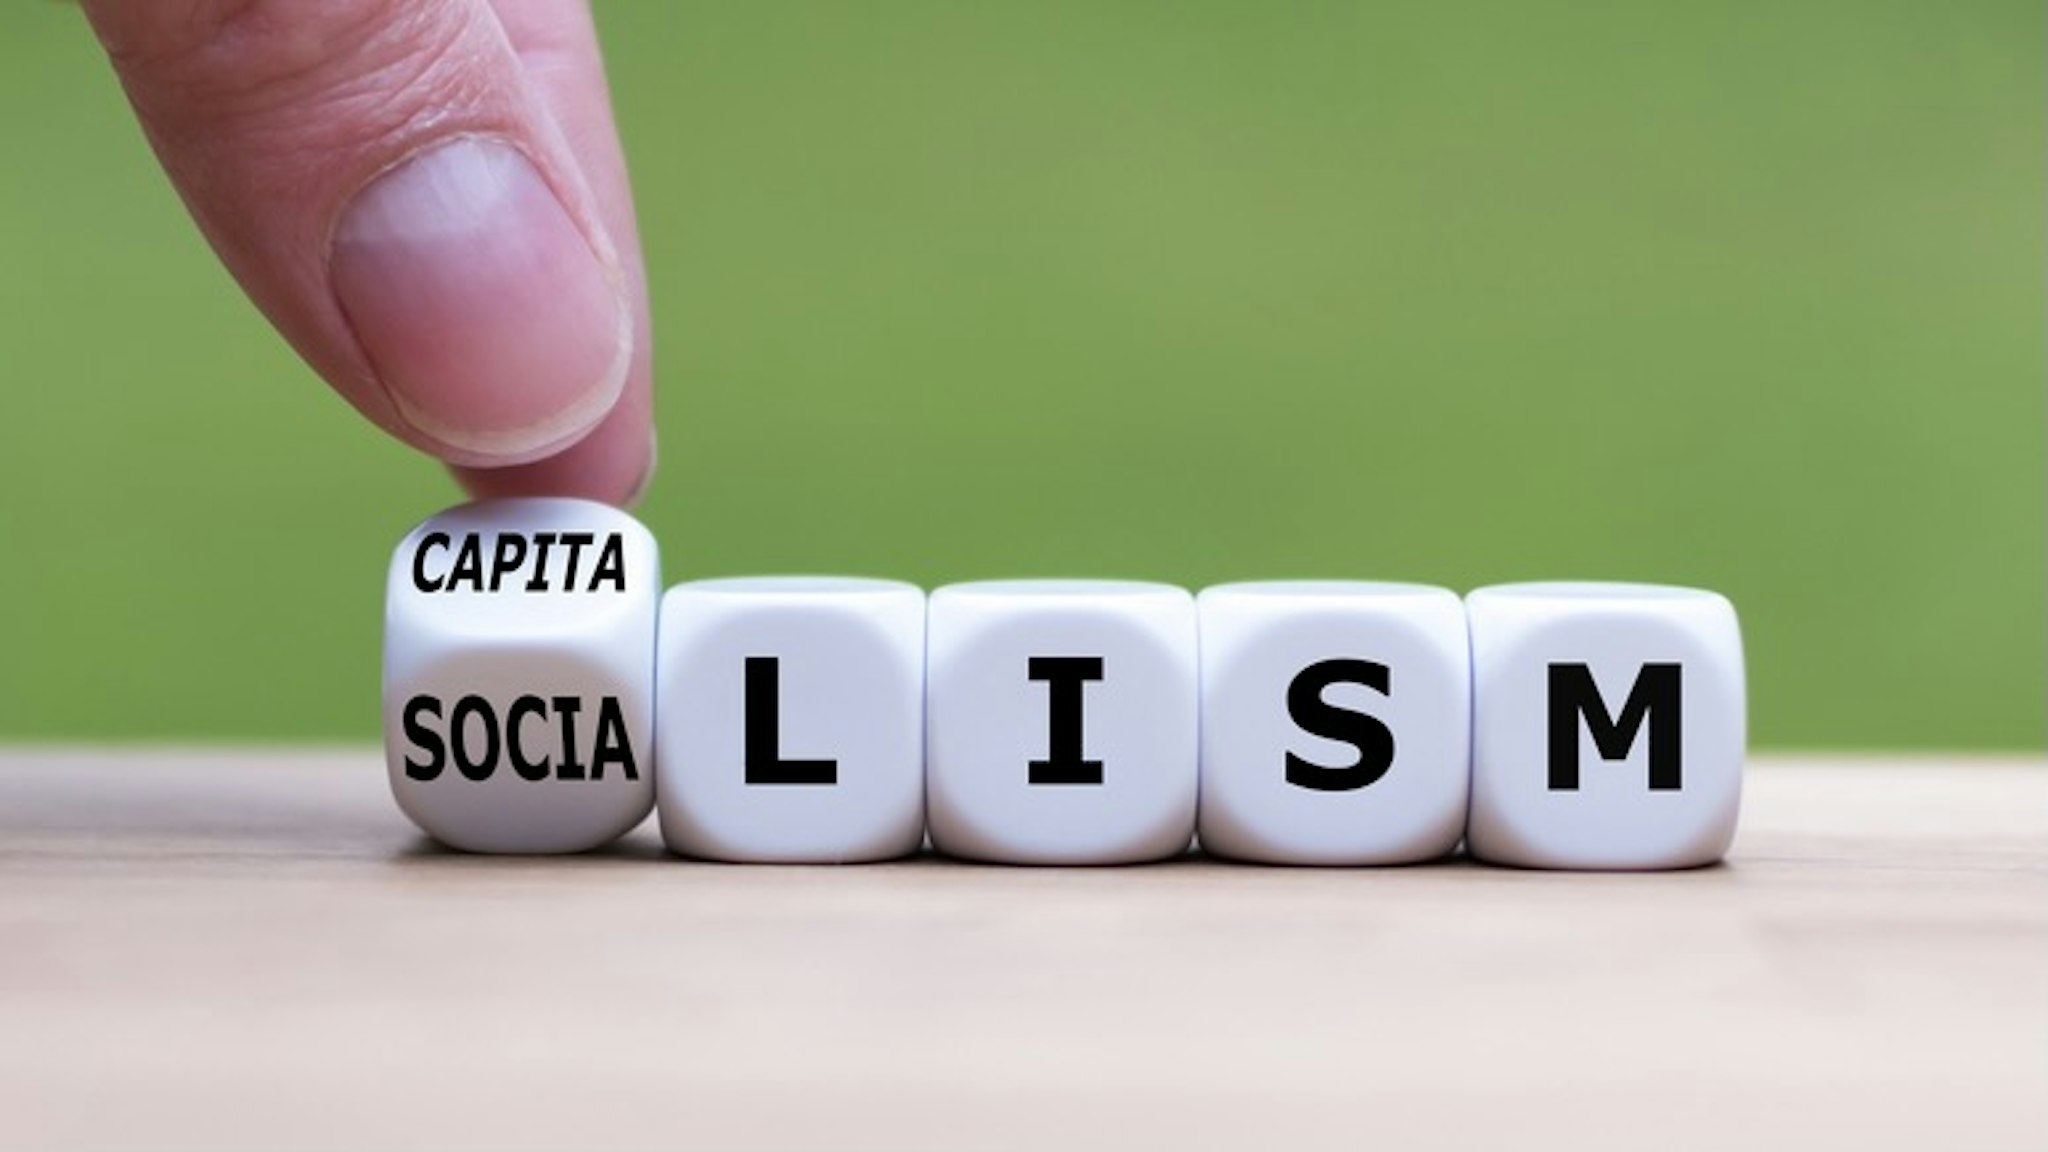 Hand flips a dice and changes the word "Socialism" to "Capitalism", or vice versa. - stock photo Hand flips a dice and changes the word "Socialism" to "Capitalism", or vice versa. Fokusiert via Getty Images